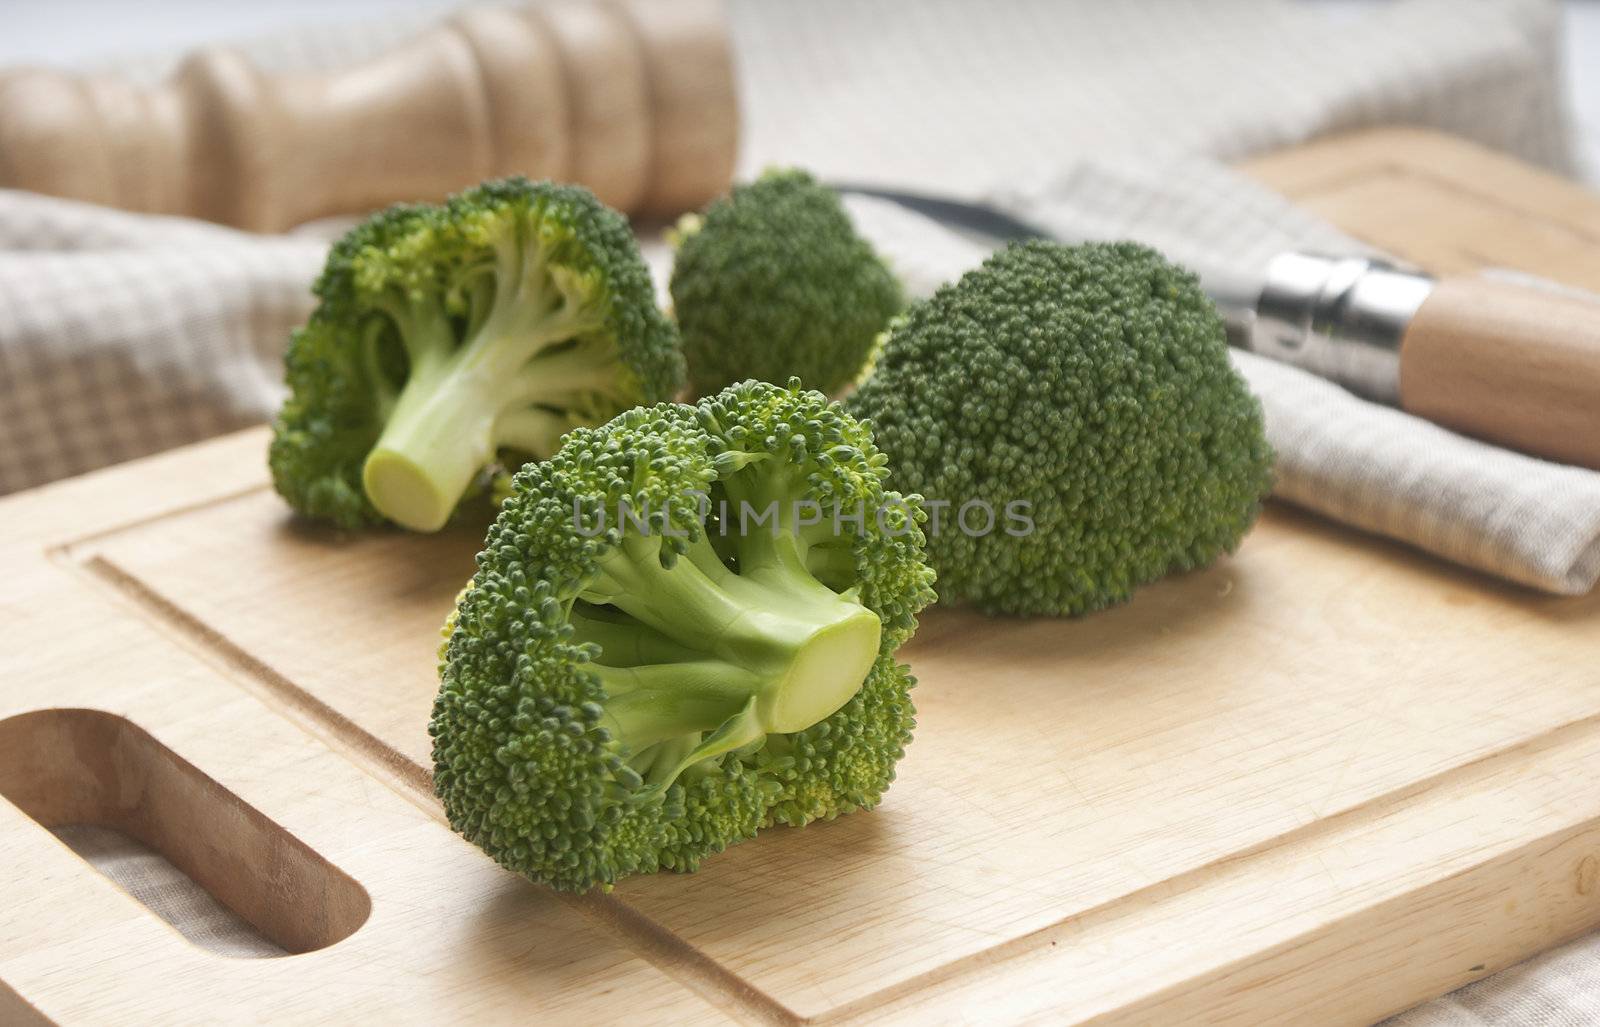 Some pieces of broccoli on the wooden board